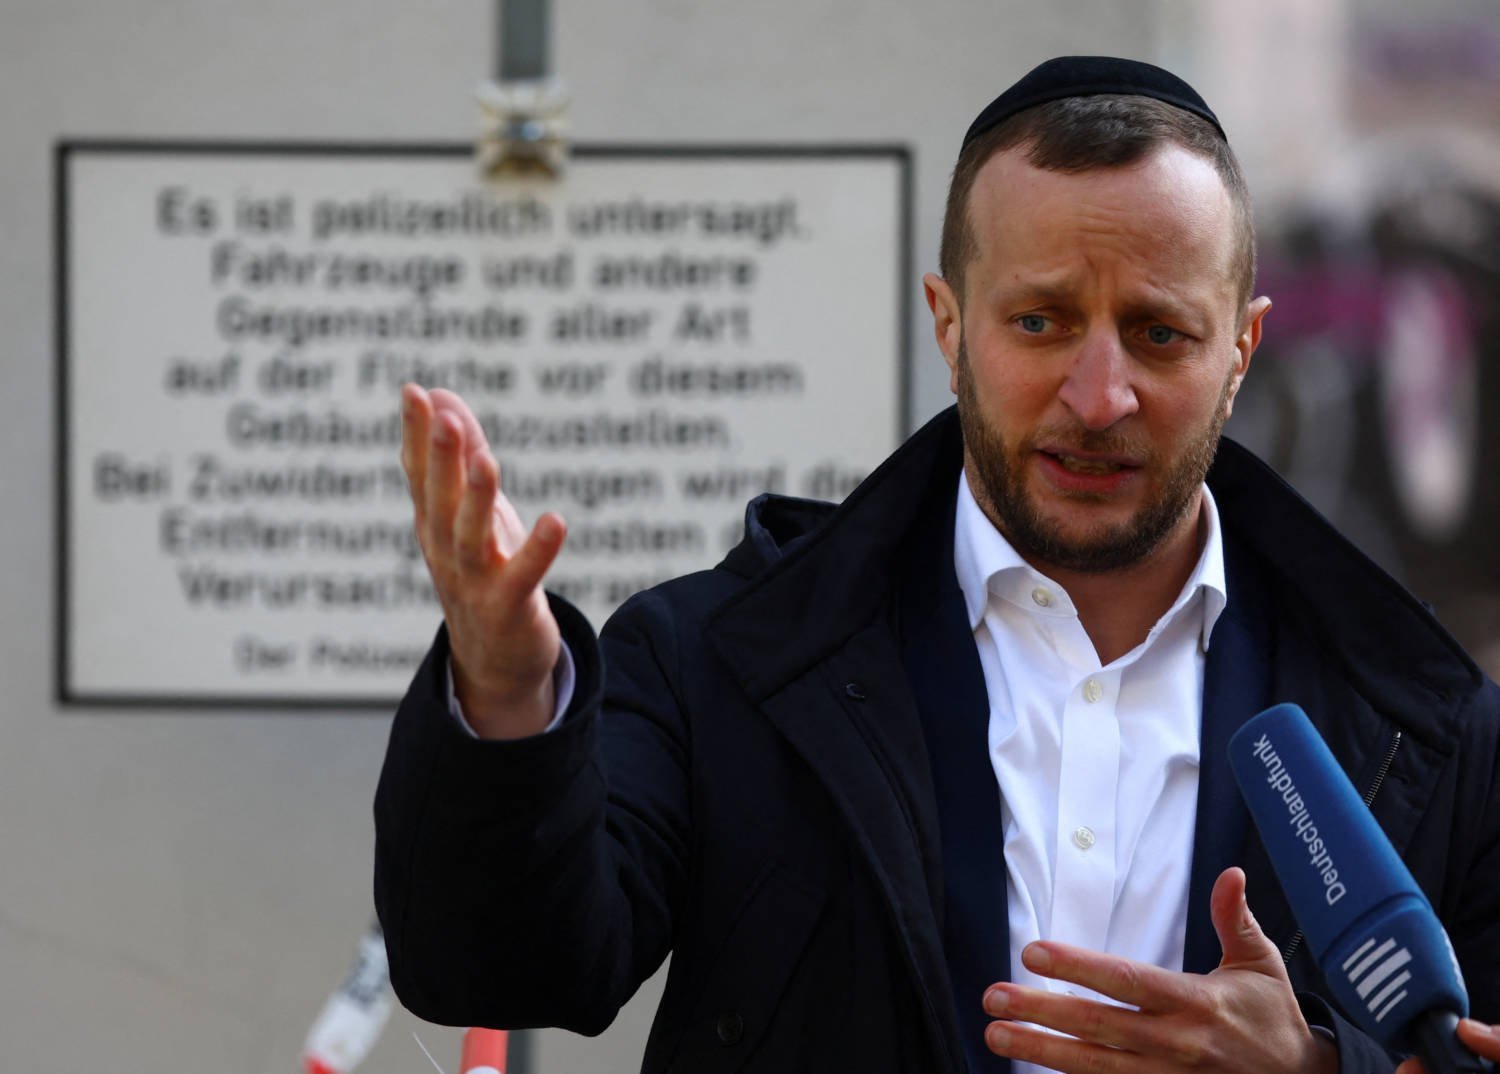 Two Molotov Cocktails Thrown At Berlin Synagogue Overnight